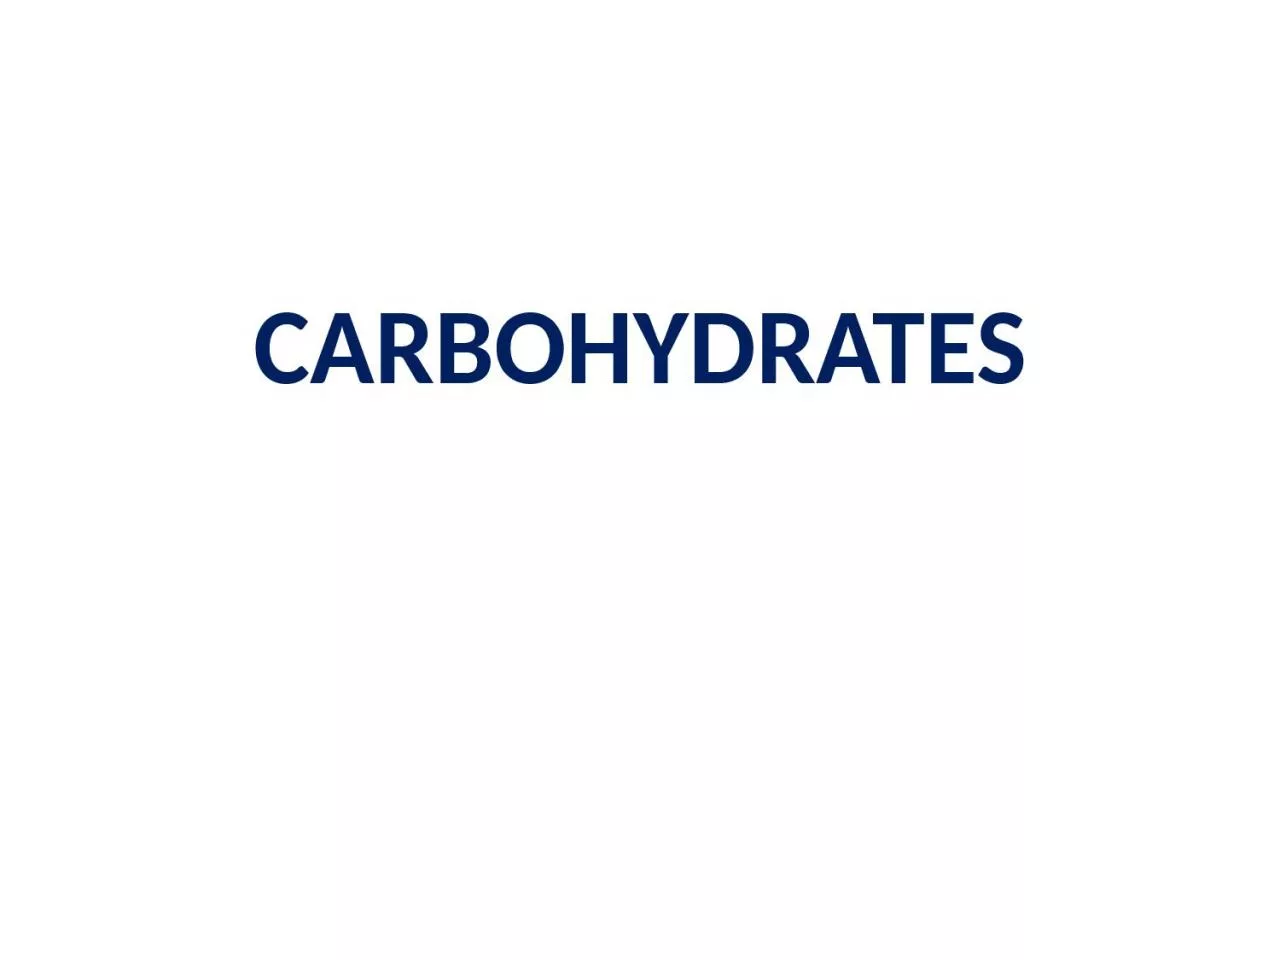 CARBOHYDRATES Introduction